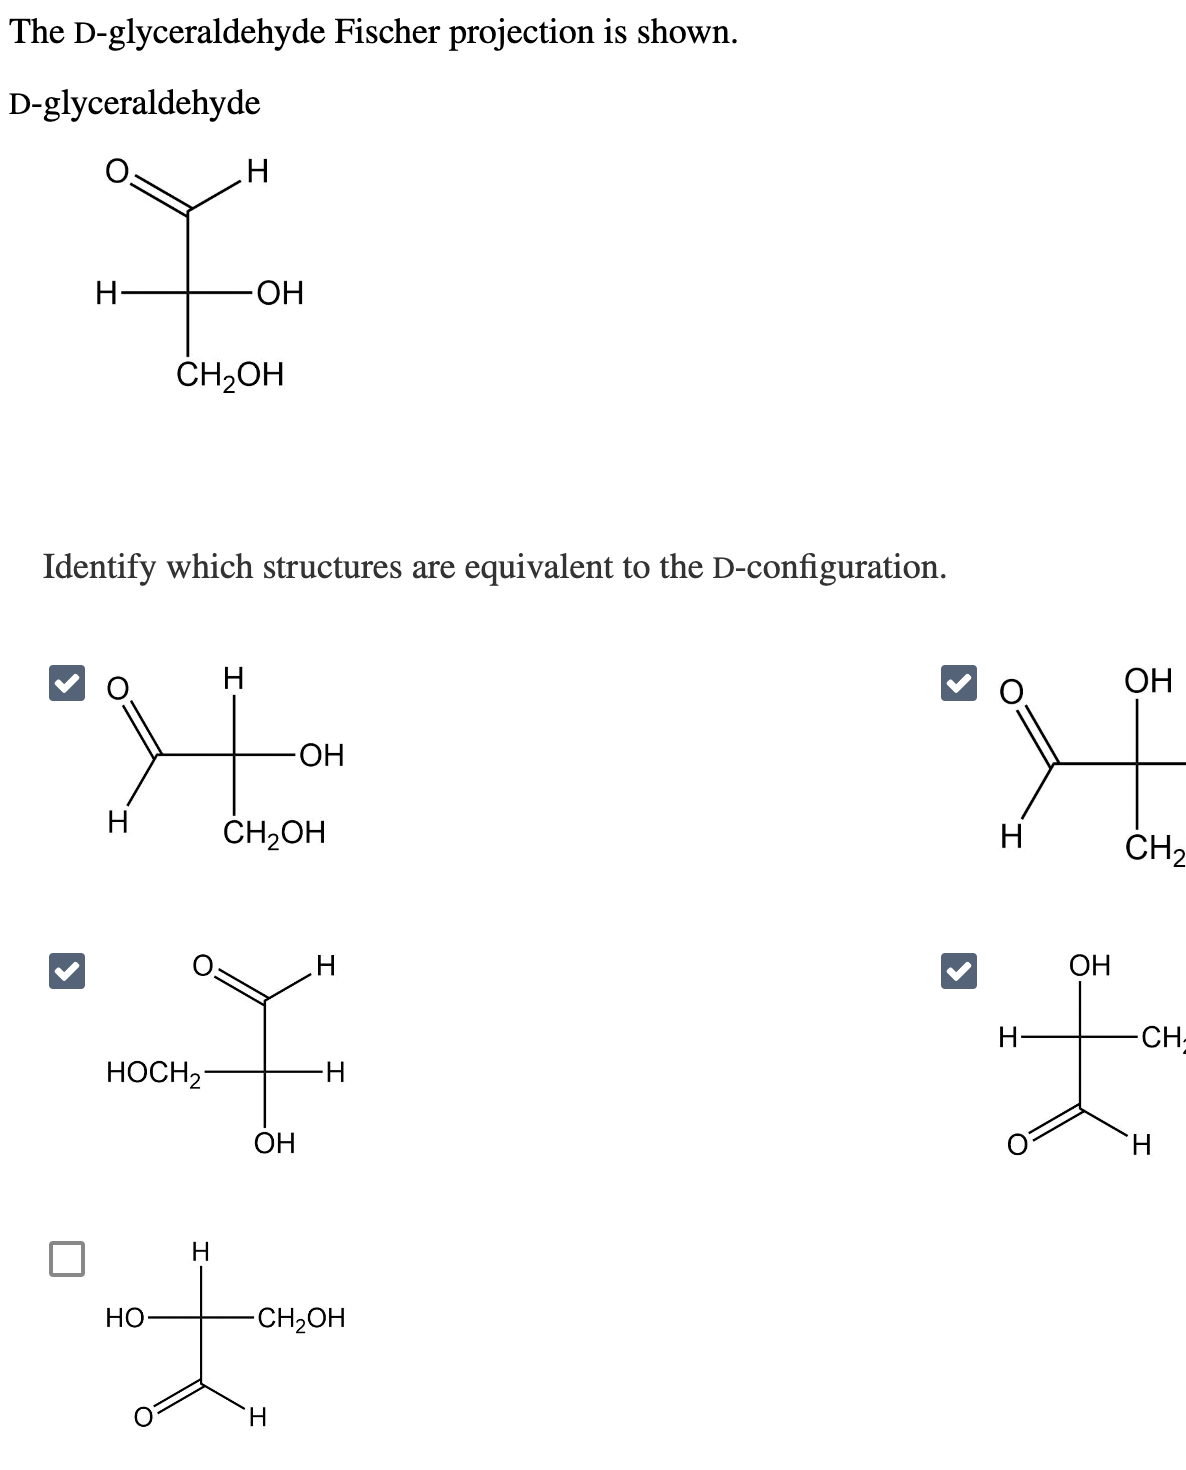 The D-glyceraldehyde Fischer projection is shown.
D-glyceraldehyde
t
Н
HOCH₂
НО
H
CH₂OH
Identify which structures are equivalent to the D-configuration.
H
Н-
Н
-ОН
Н
-ОН
CH2OH
ОН
H
H
H
-CH₂OH
Н
Н-
ОН
ОН
CH₂
-CH-
H